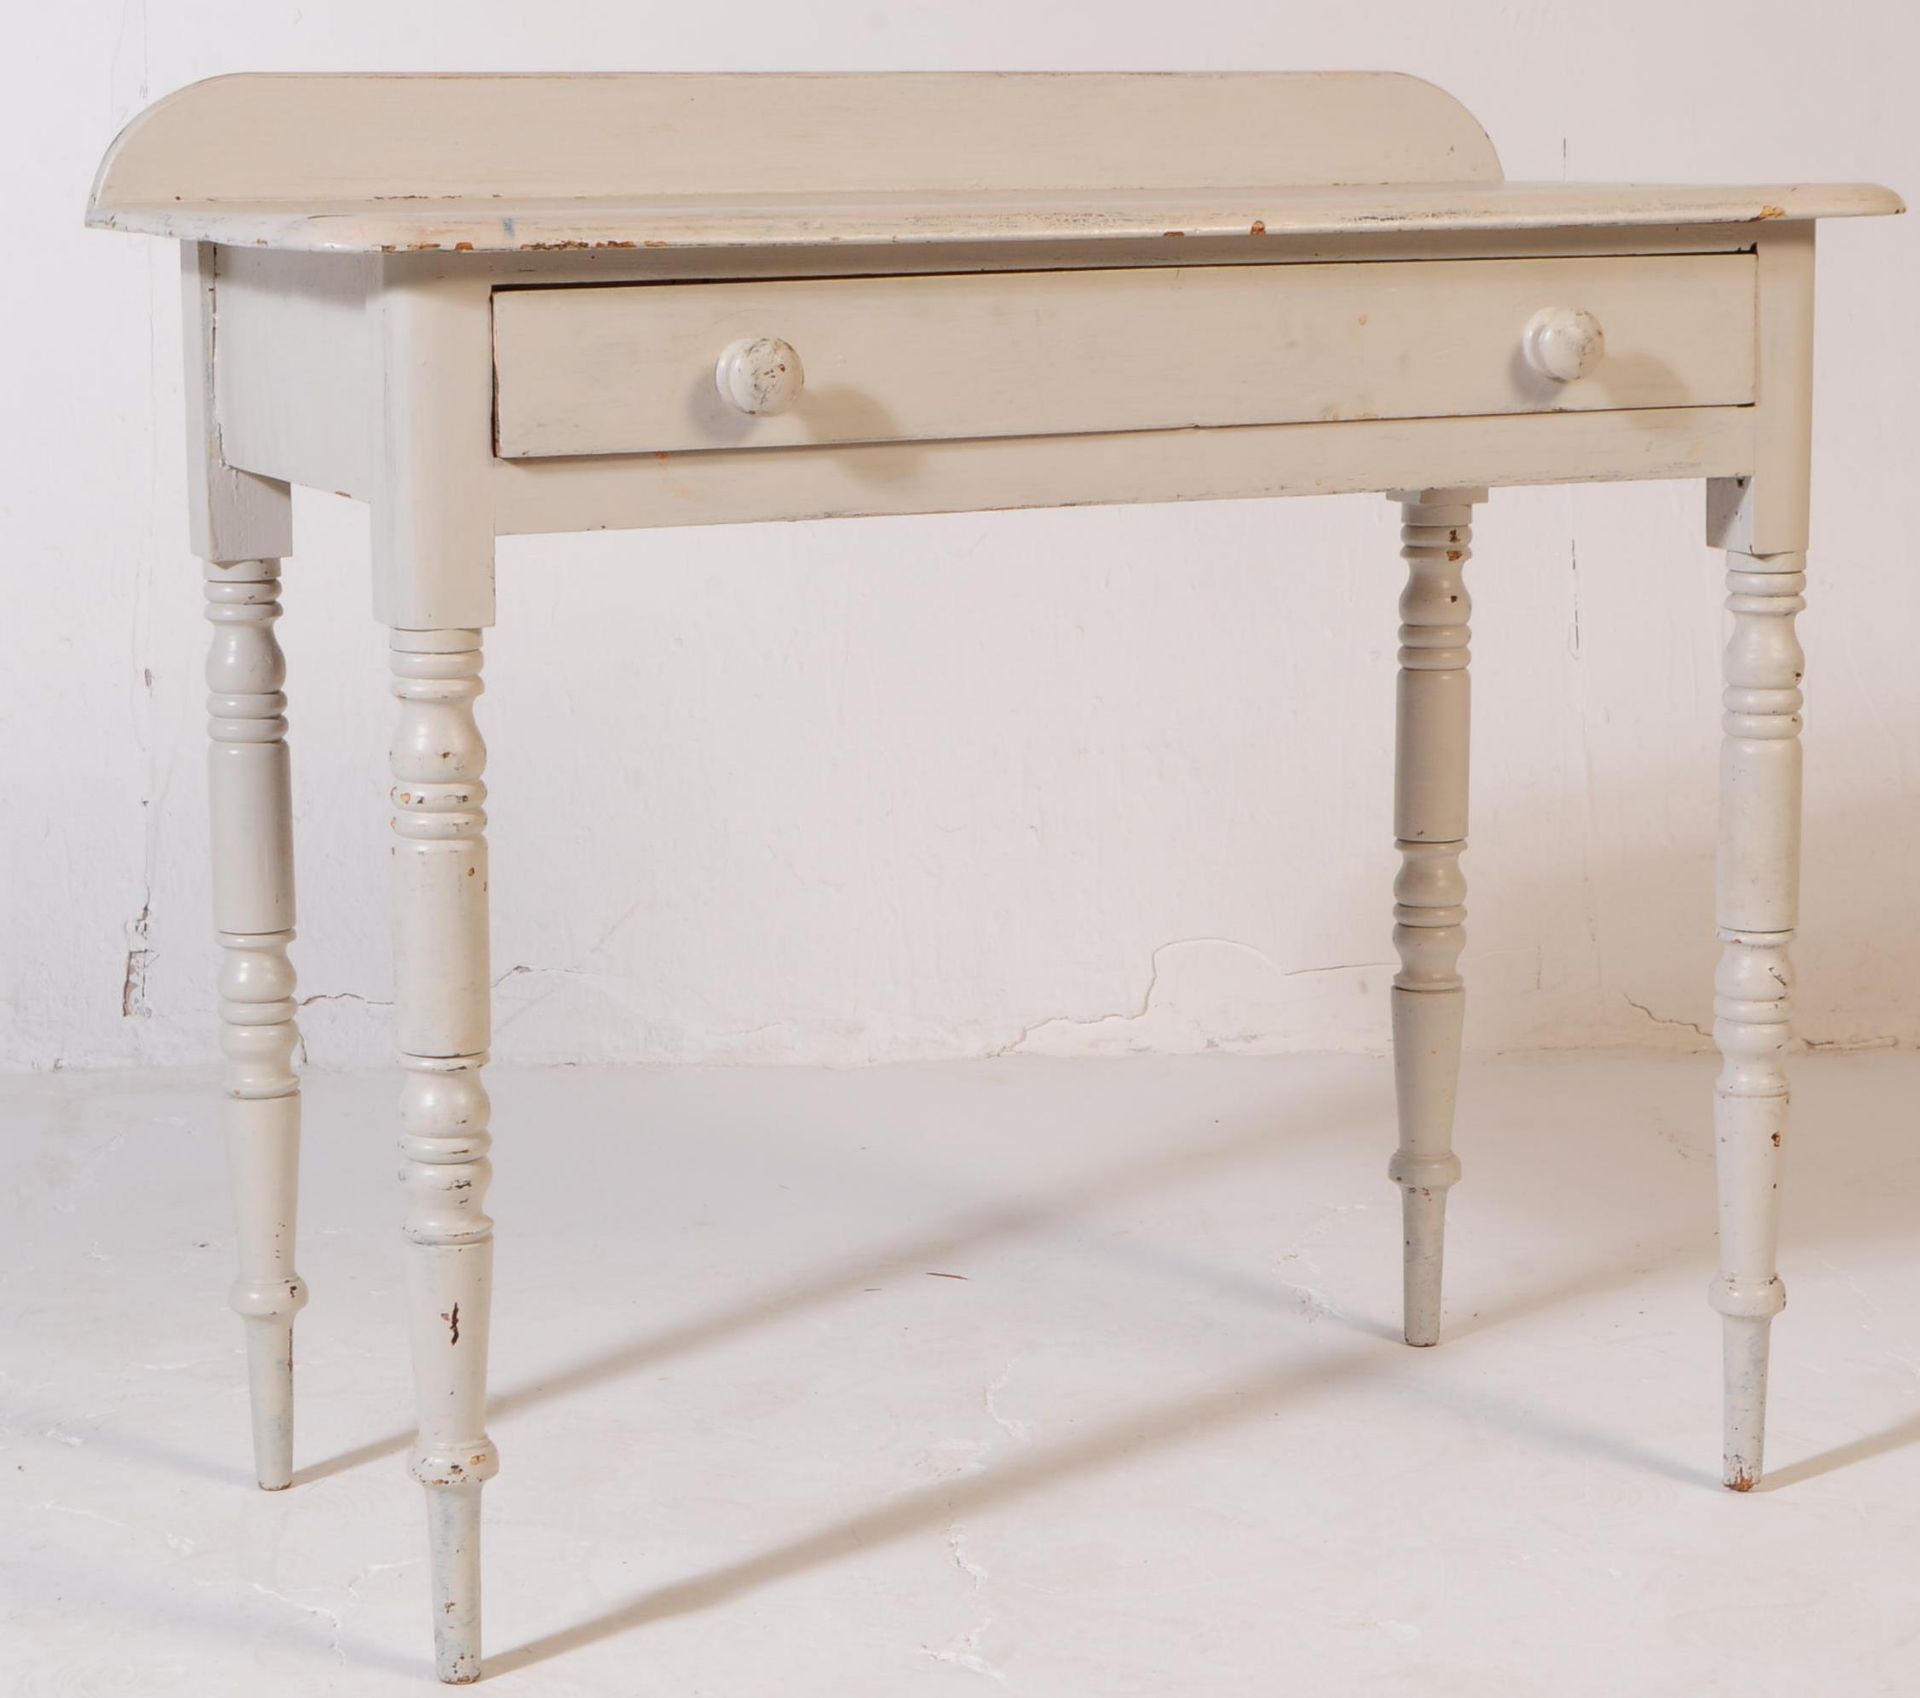 19TH CENTURY PAINTED WRITING TABLE DESK